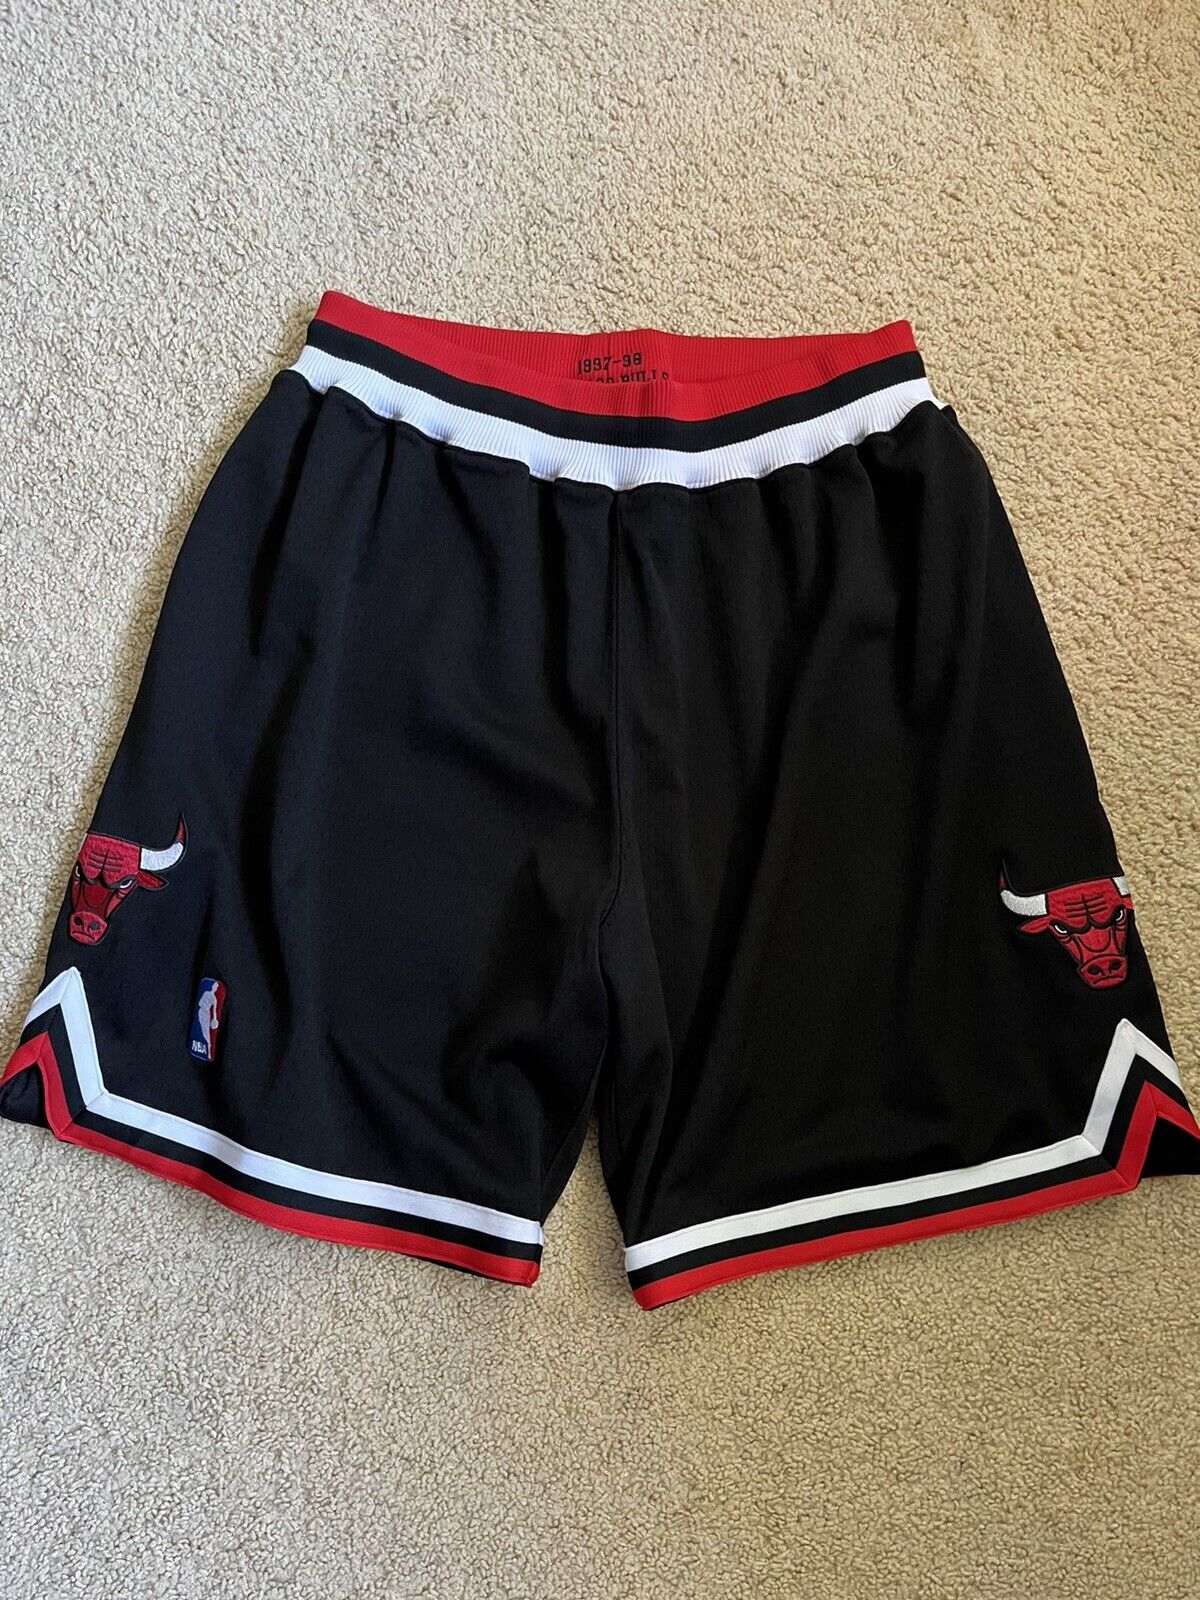 Mitchell and Ness Authentic 1997-98 Chicago Bulls NBA shorts Size Large